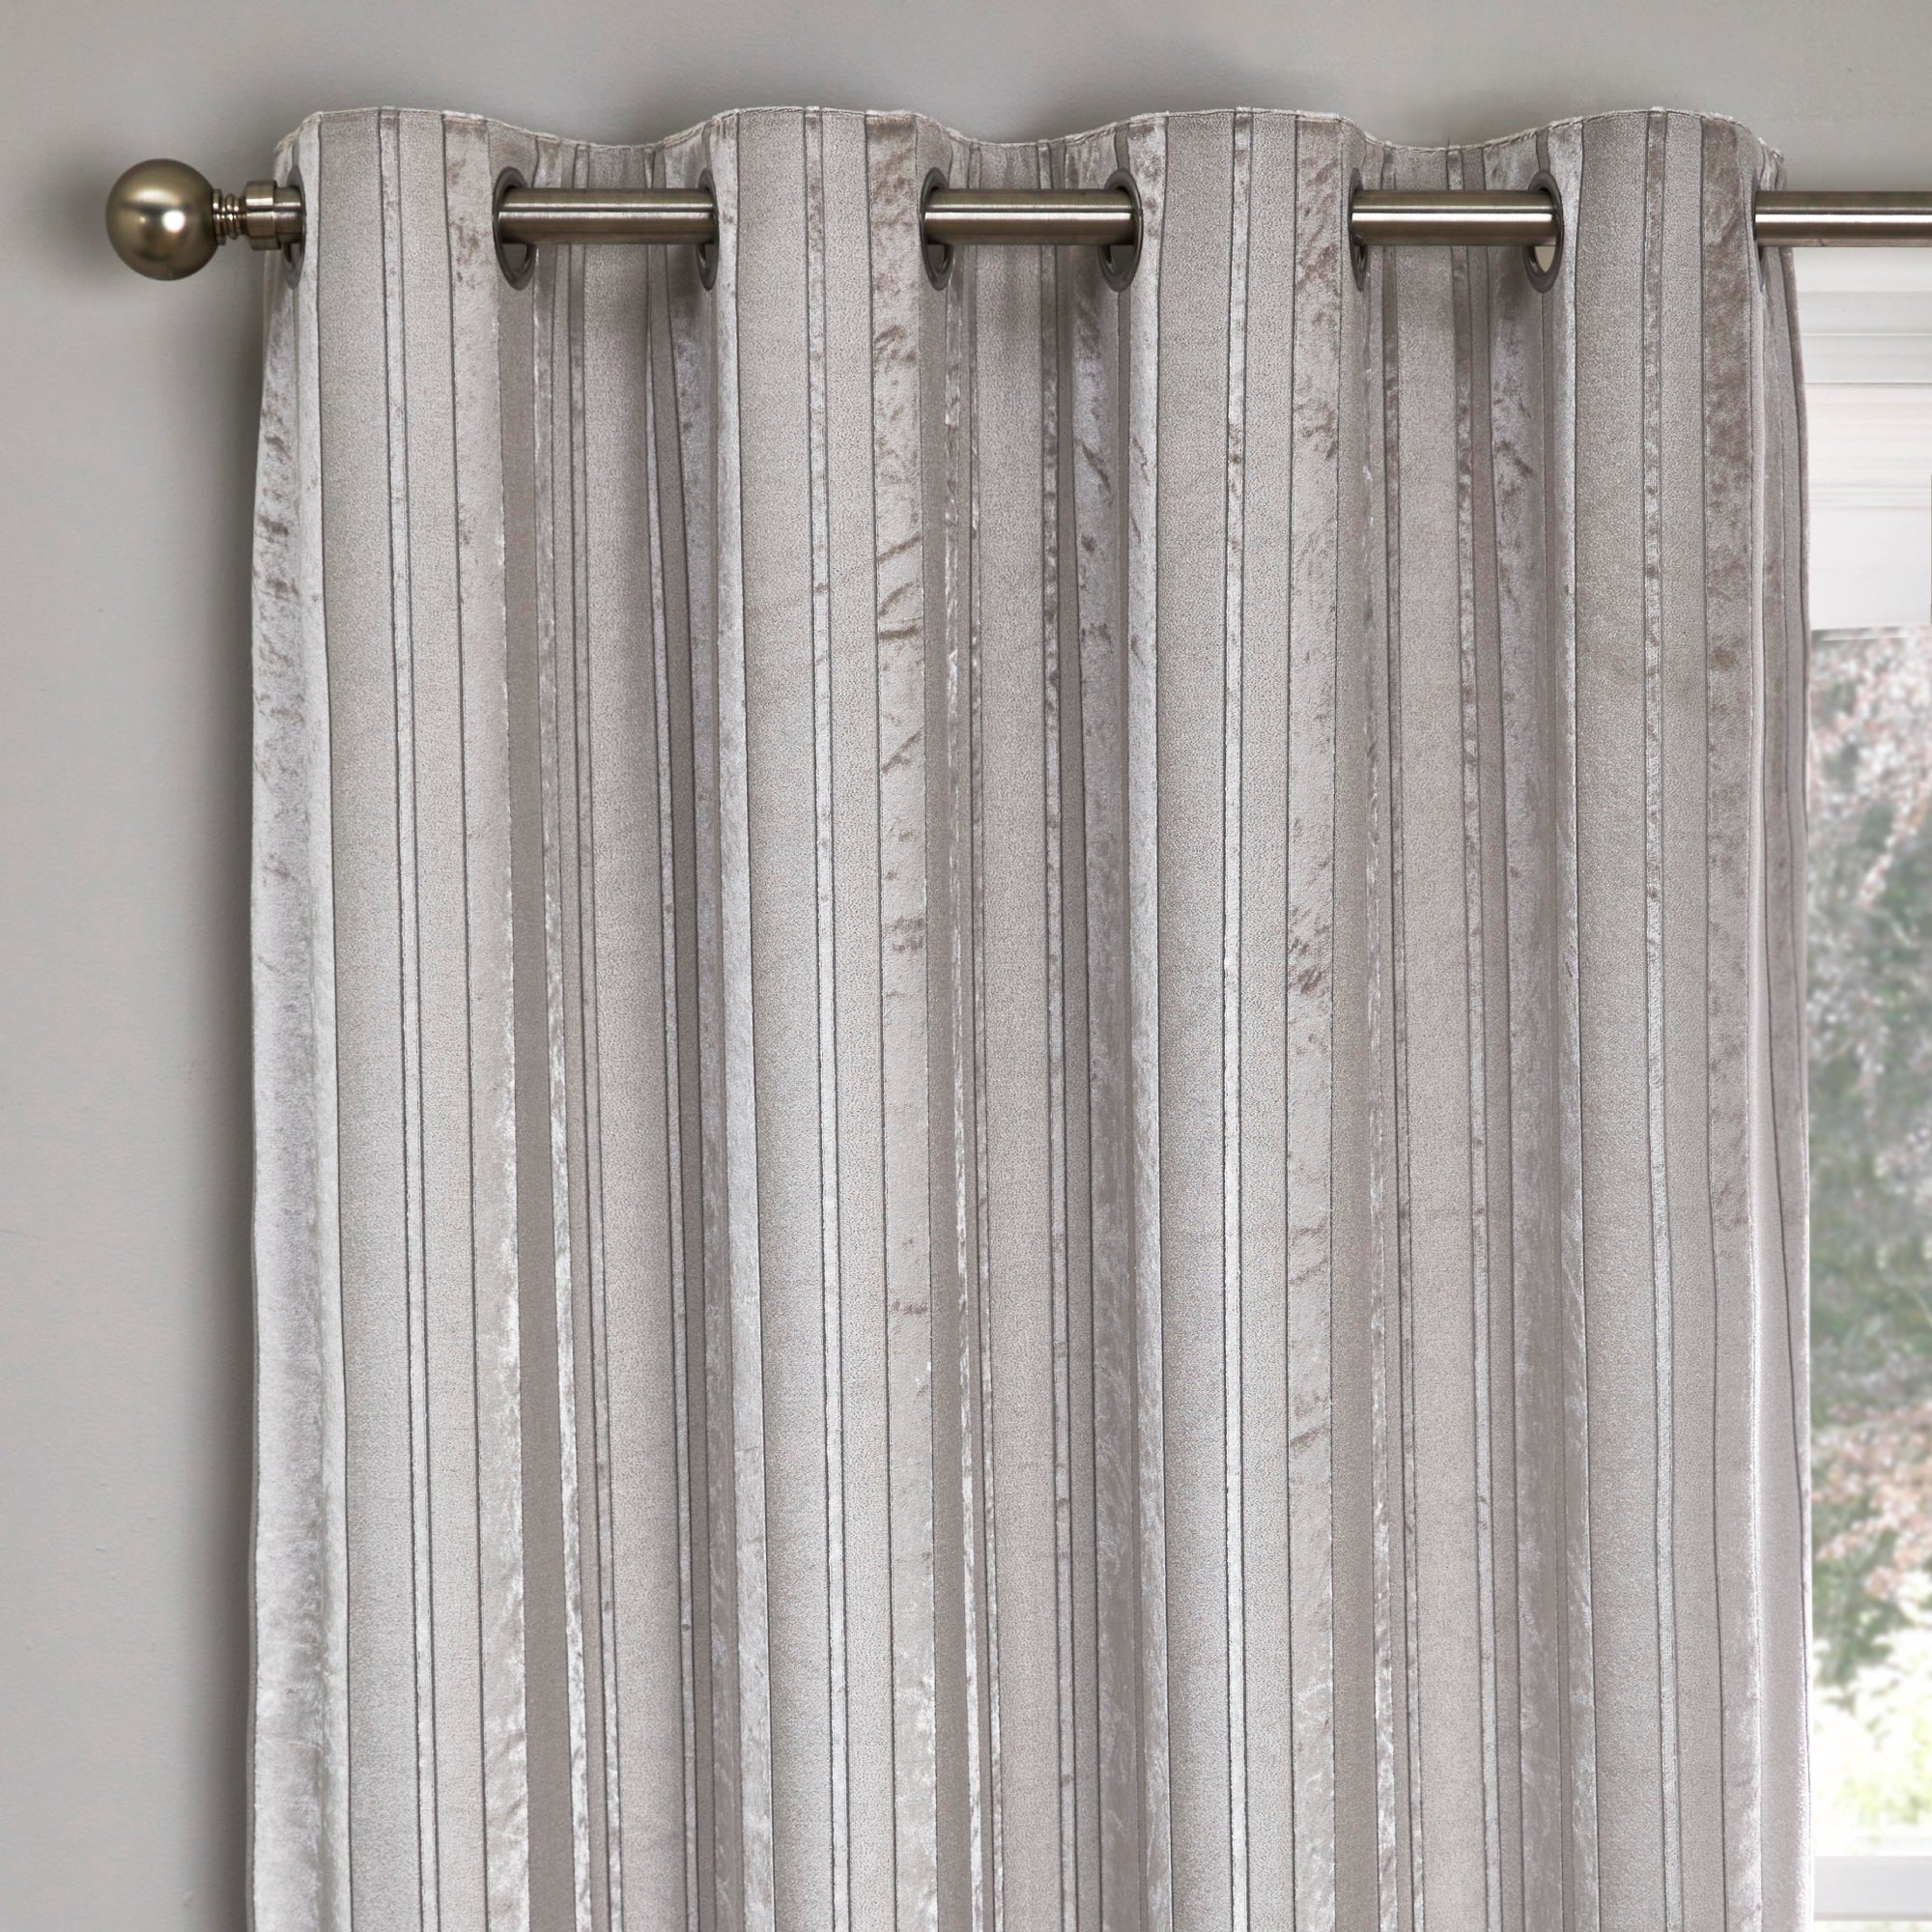 Pair of Eyelet Curtains Conrad by Appletree Boutique in Silver